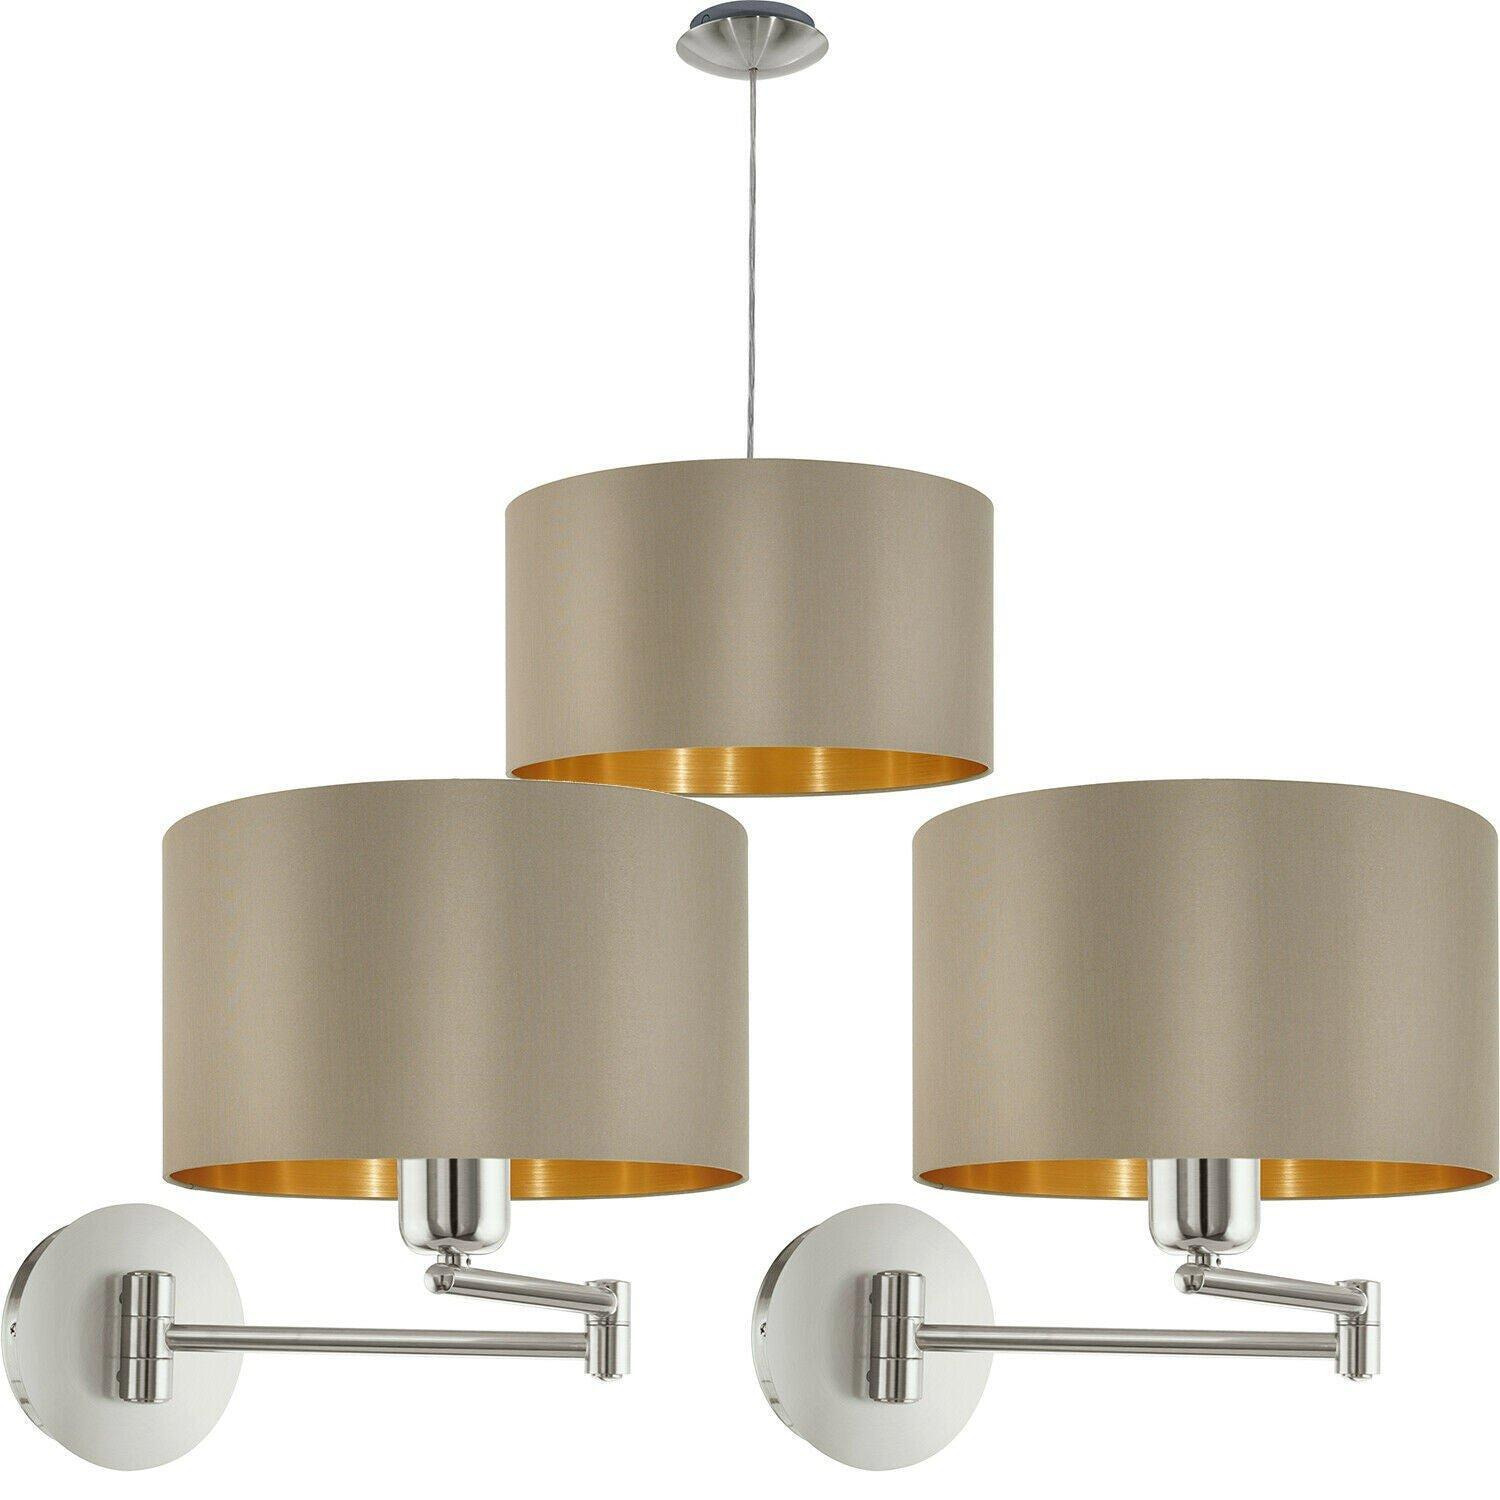 Ceiling Pendant & 2x Matching Wall Lights Taupe & Gold Fabric Feature Shade - image 1